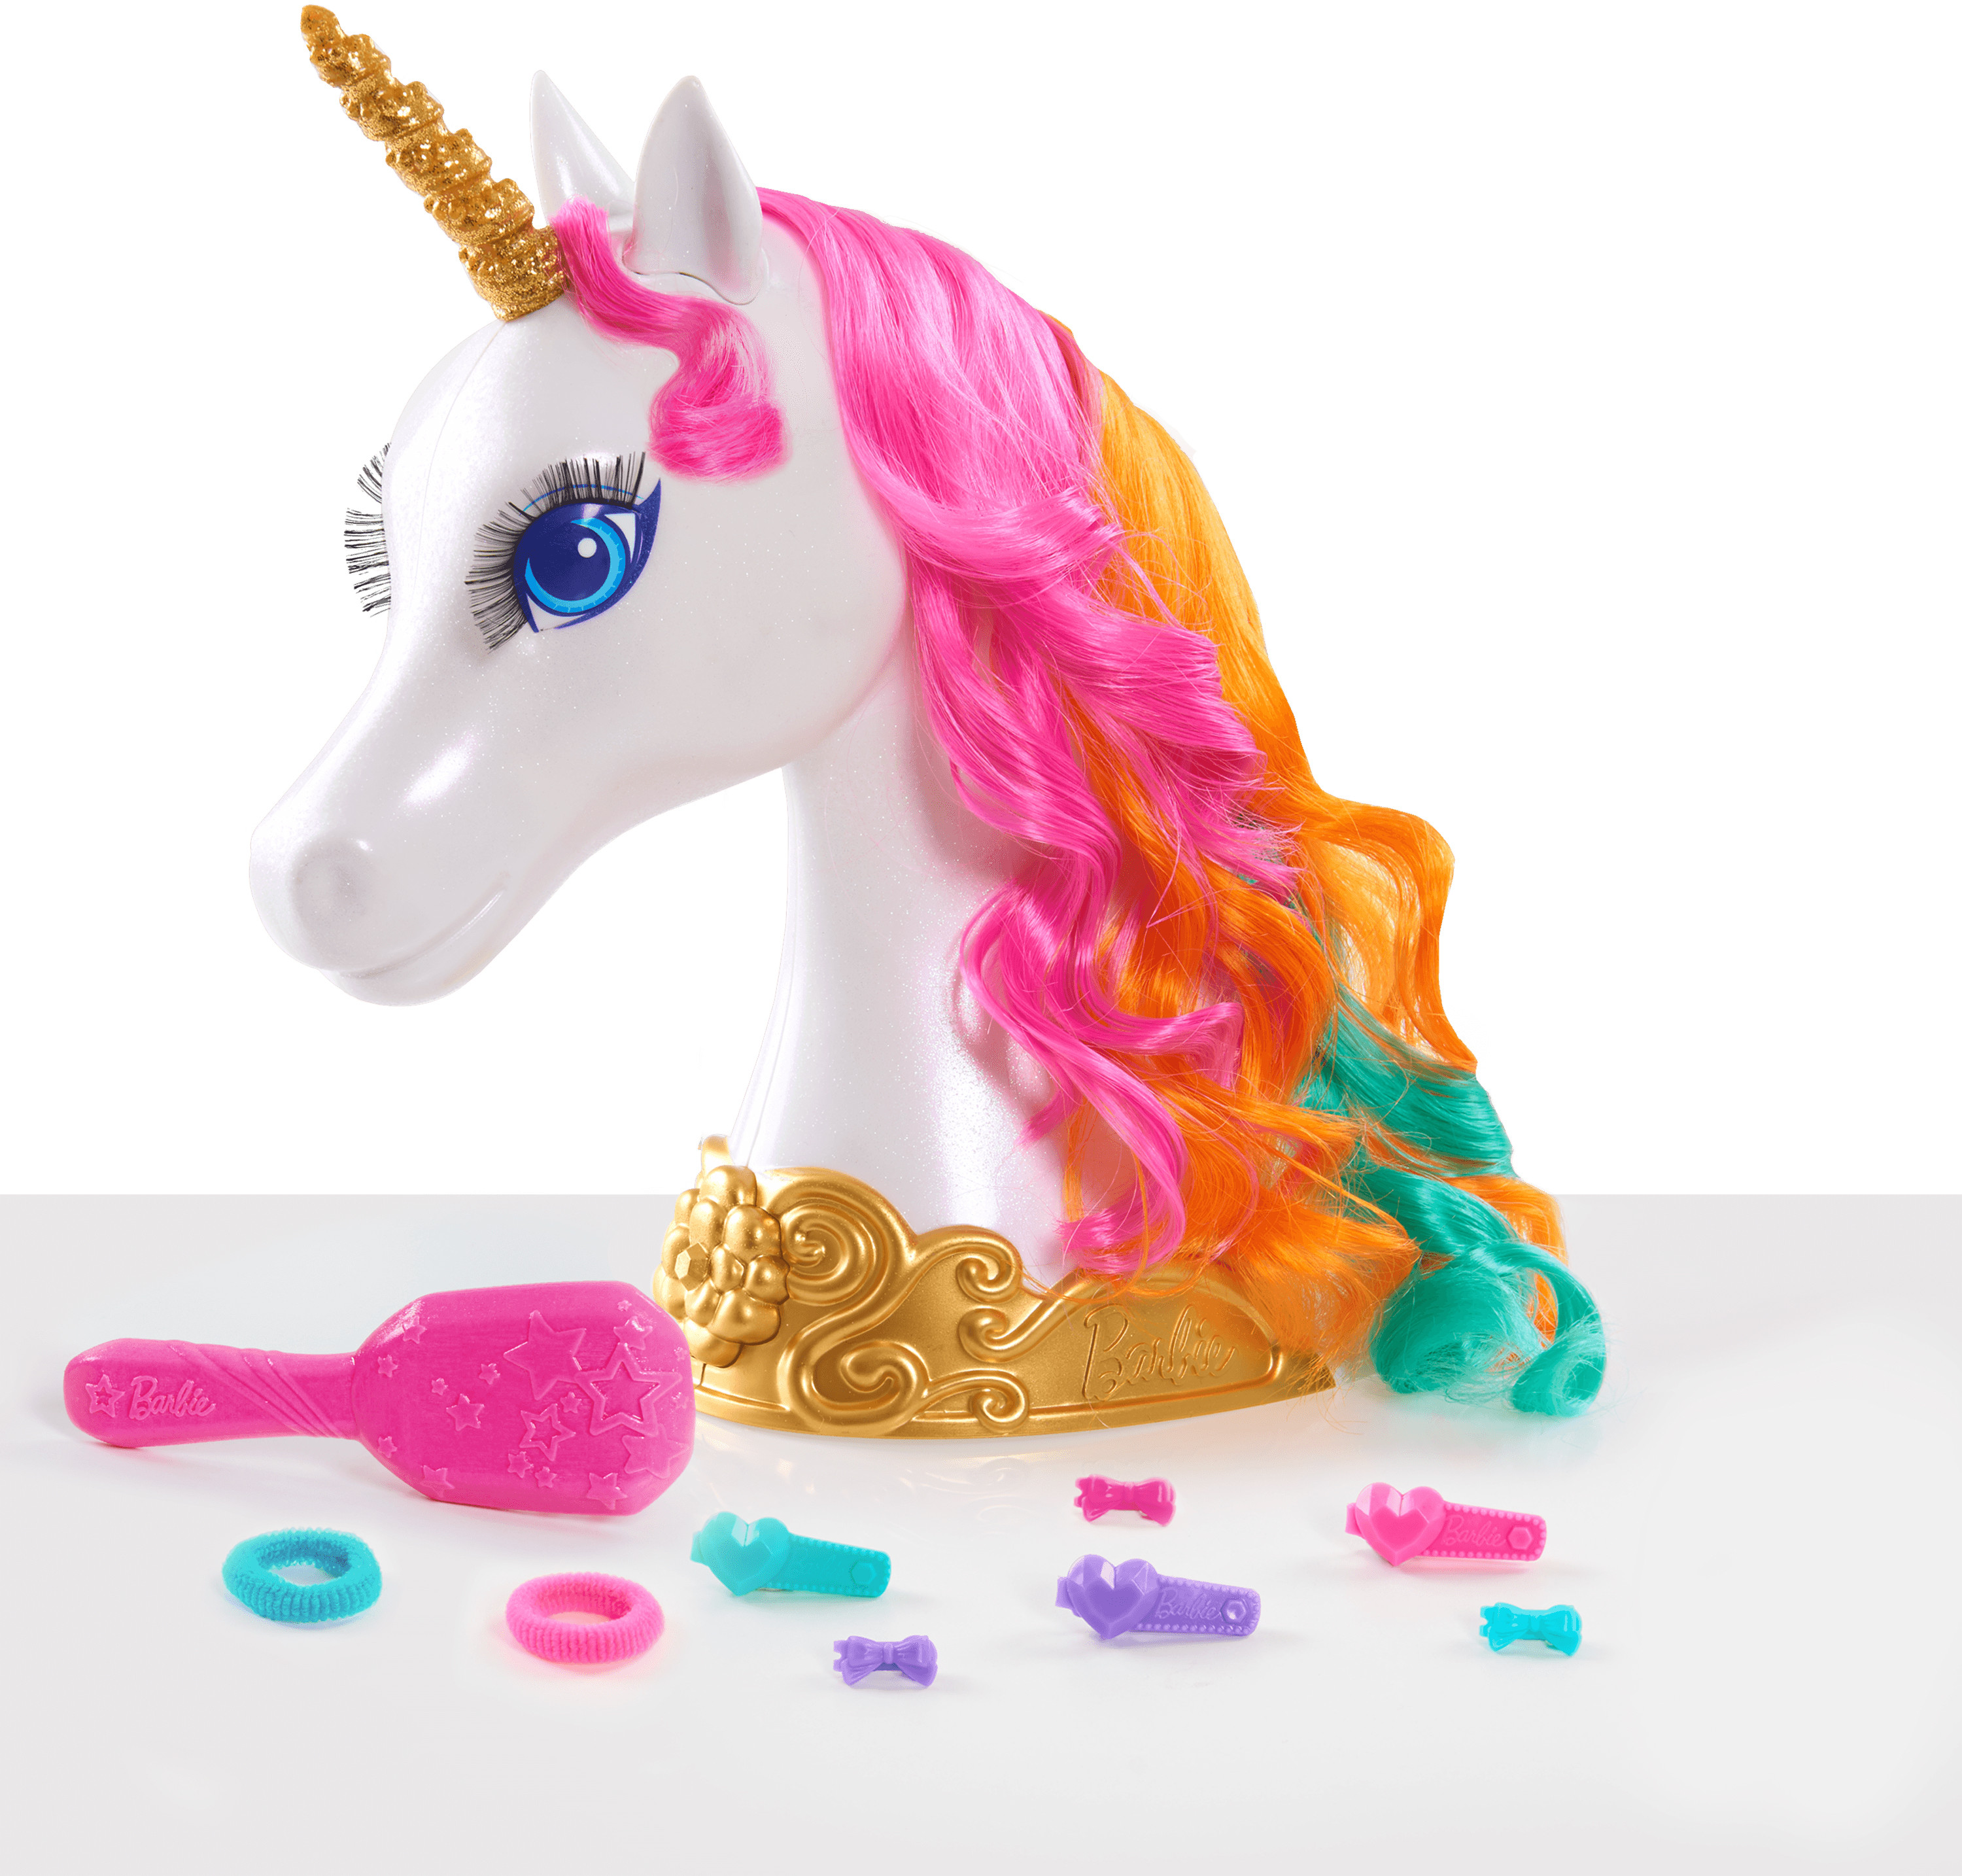 Barbie Dreamtopia Unicorn Styling Head, 10-pieces, Kids Toys for Ages 3 Up, Gifts and Presents - image 4 of 4